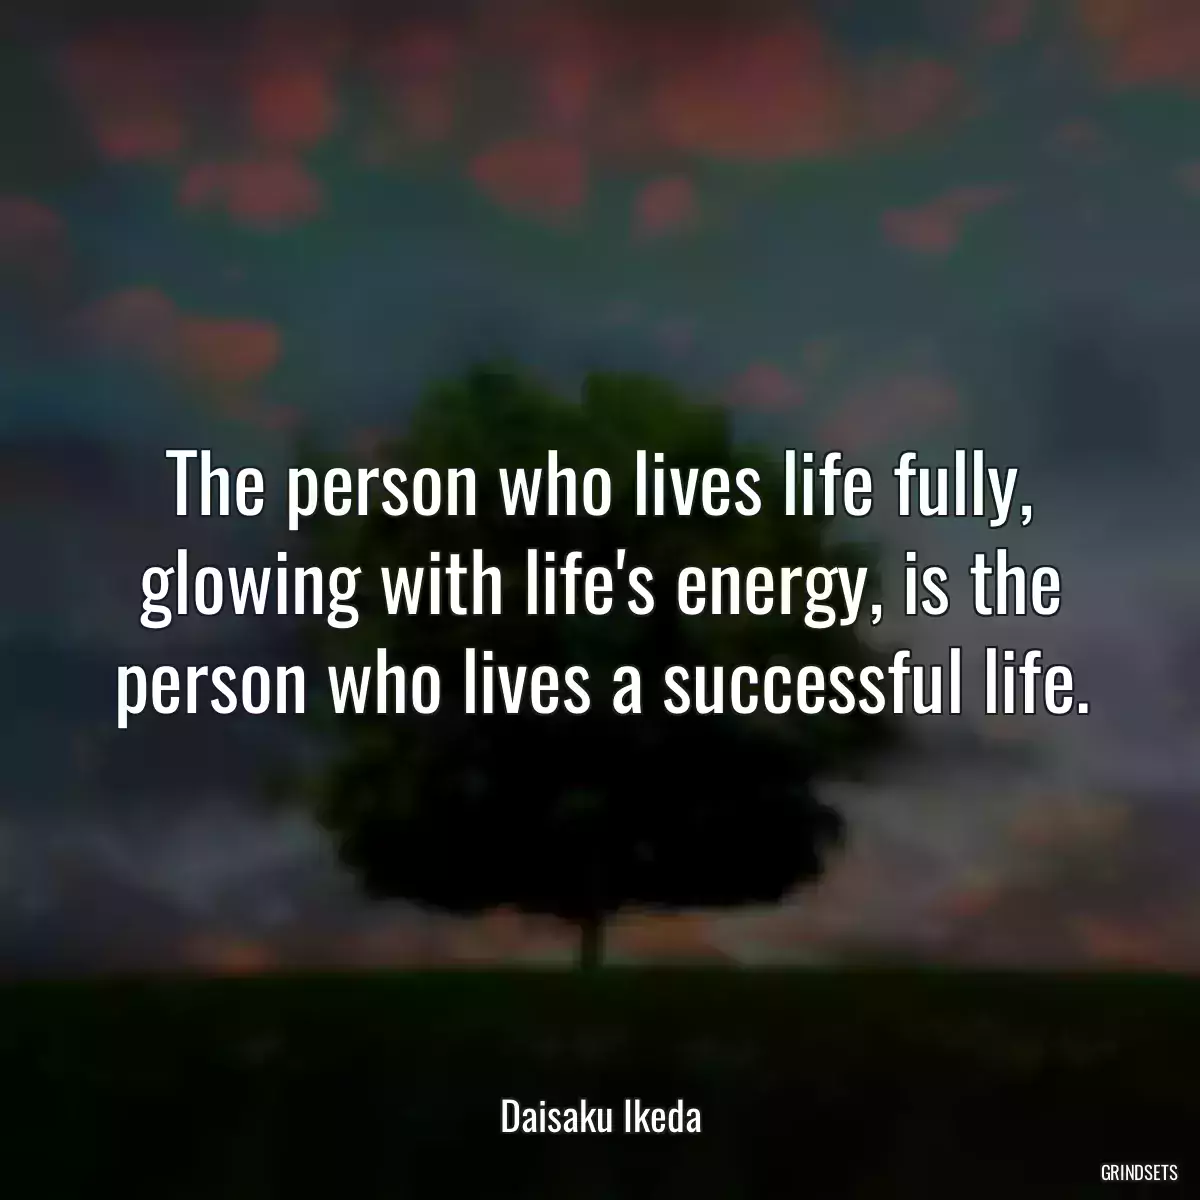 The person who lives life fully, glowing with life\'s energy, is the person who lives a successful life.